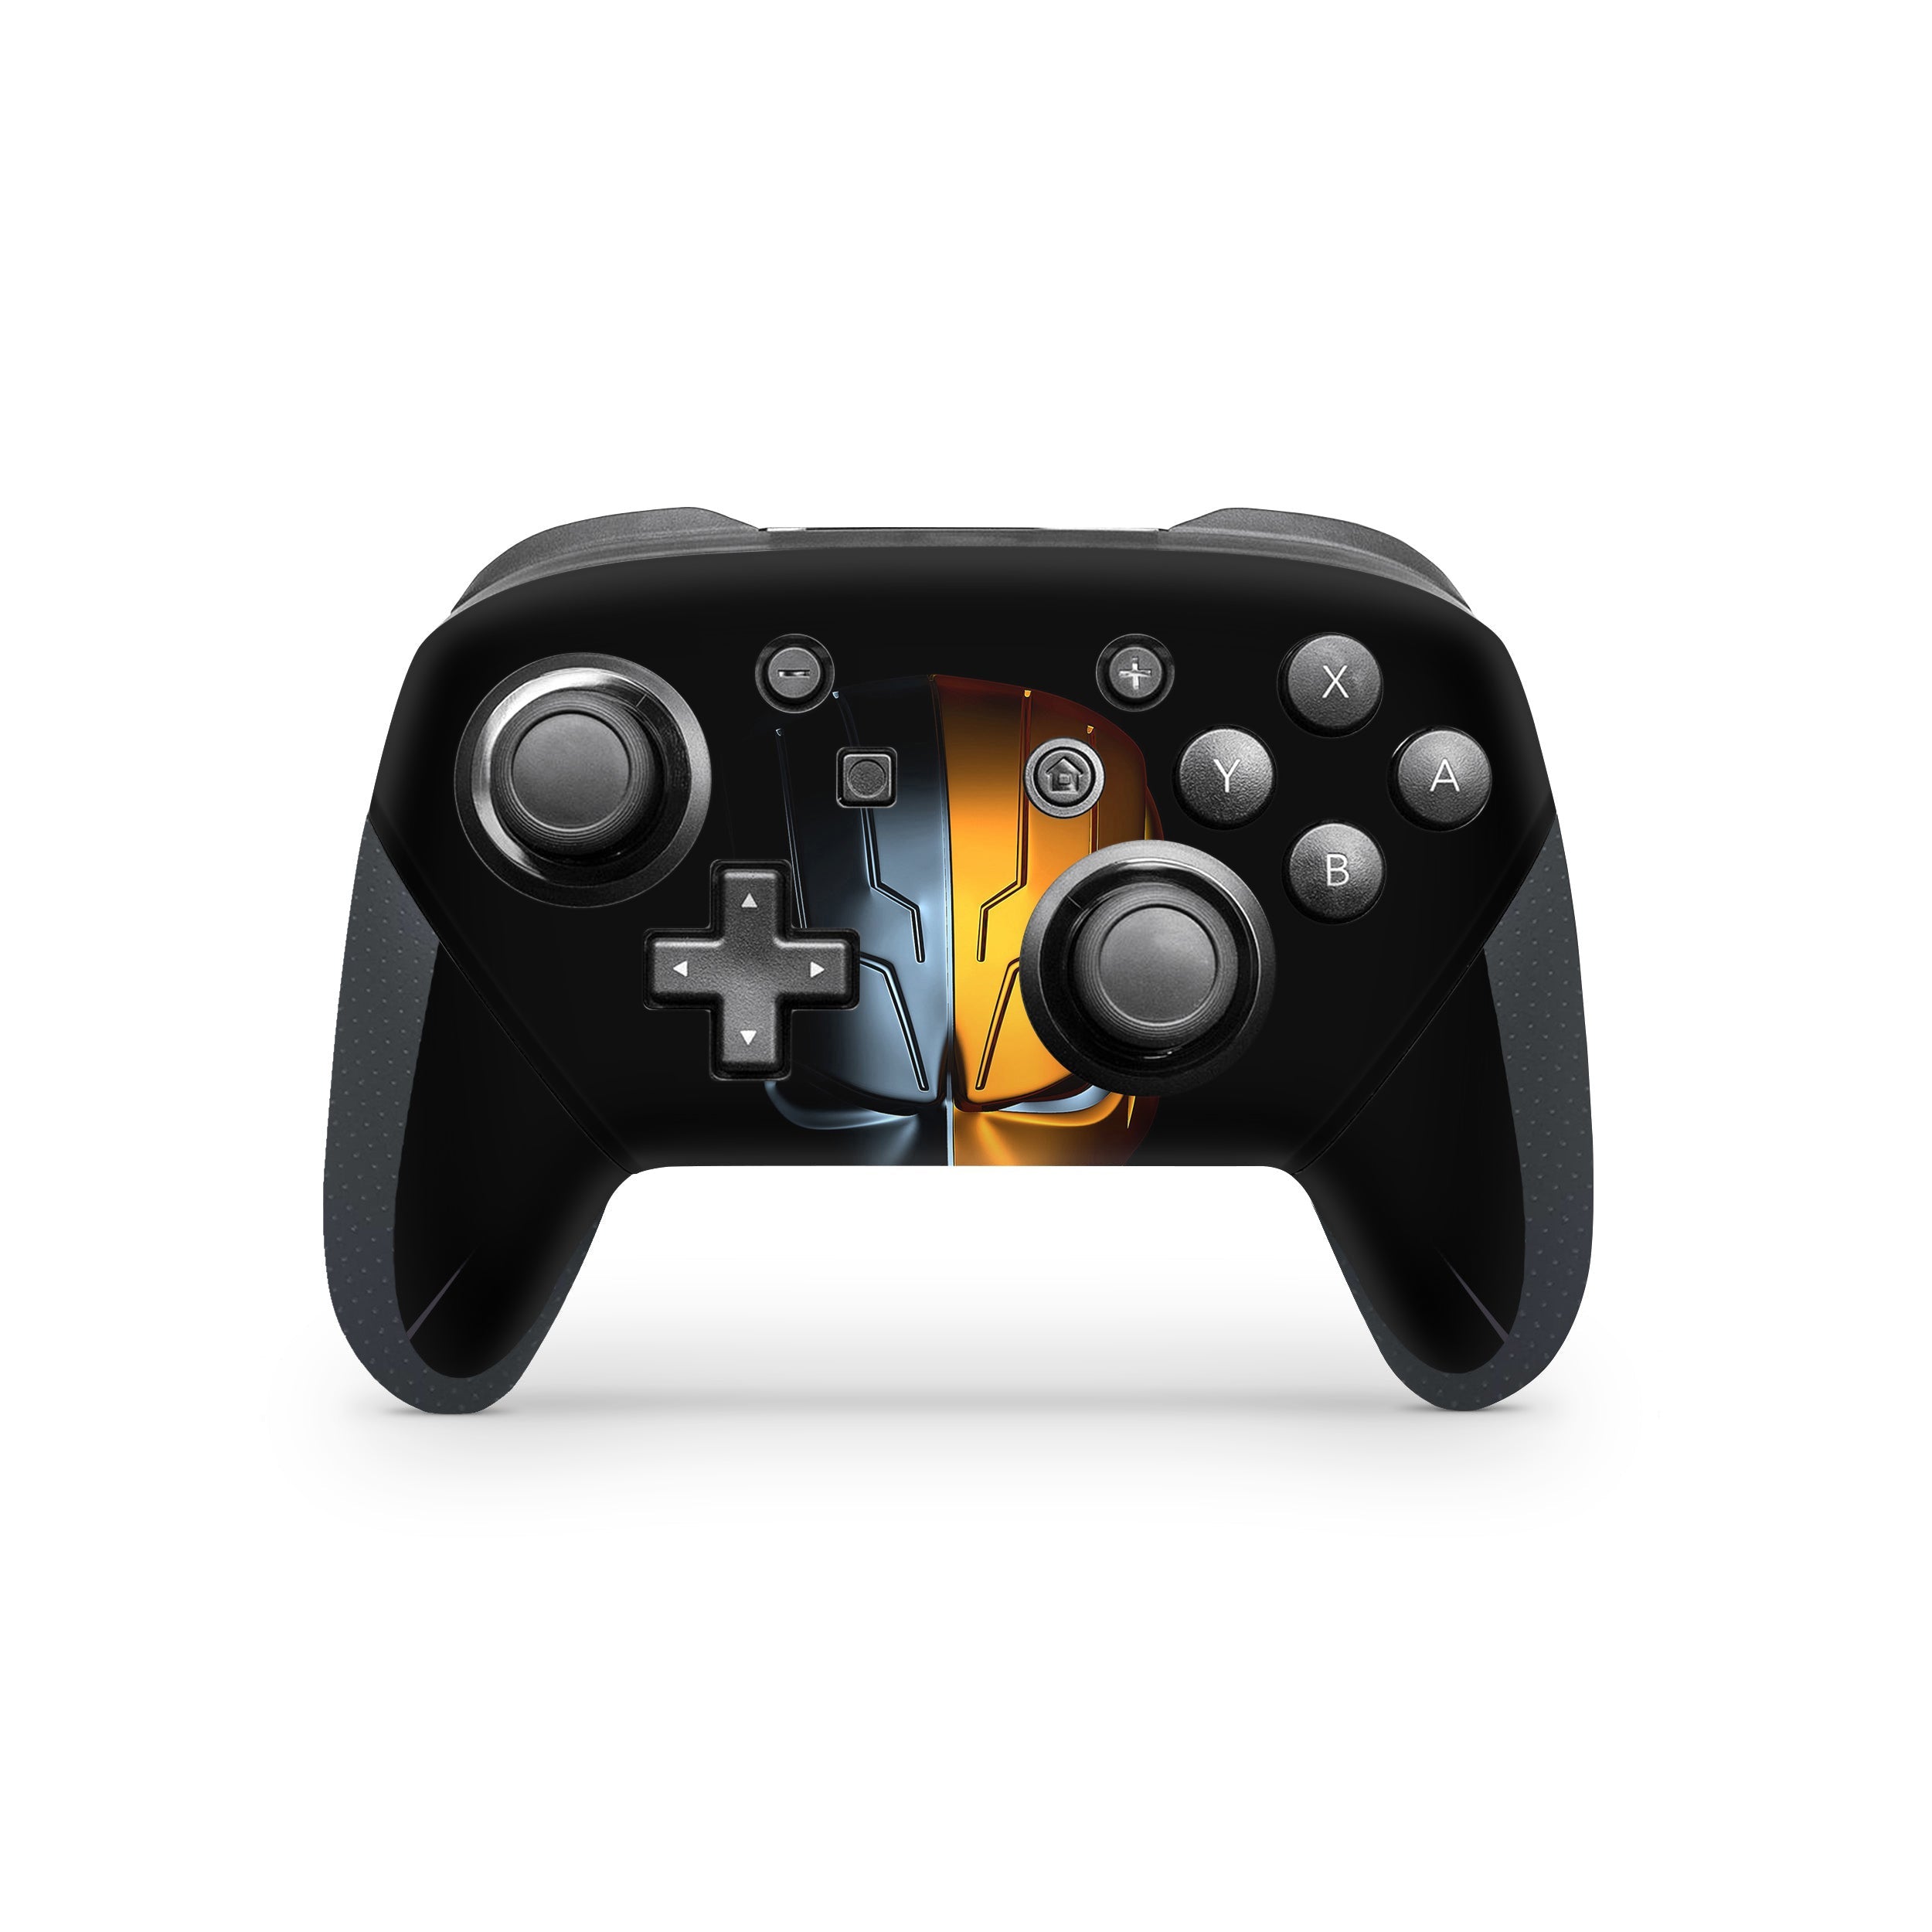 A video game skin featuring a DC Comics Deathstroke design for the Switch Pro Controller.